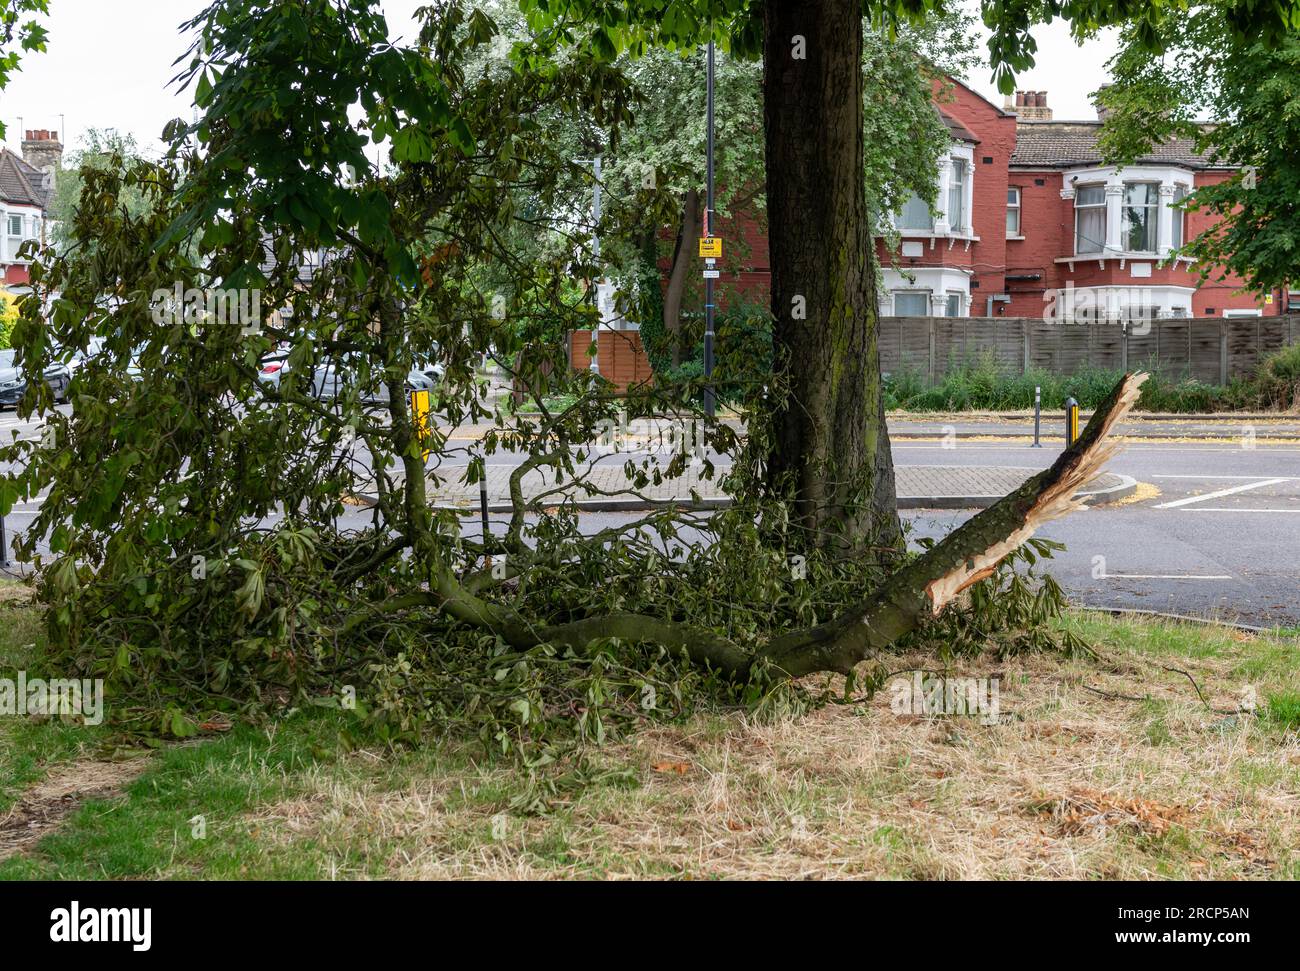 A fallen tree branch by the road which could cause serious injuries to a person. Stock Photo